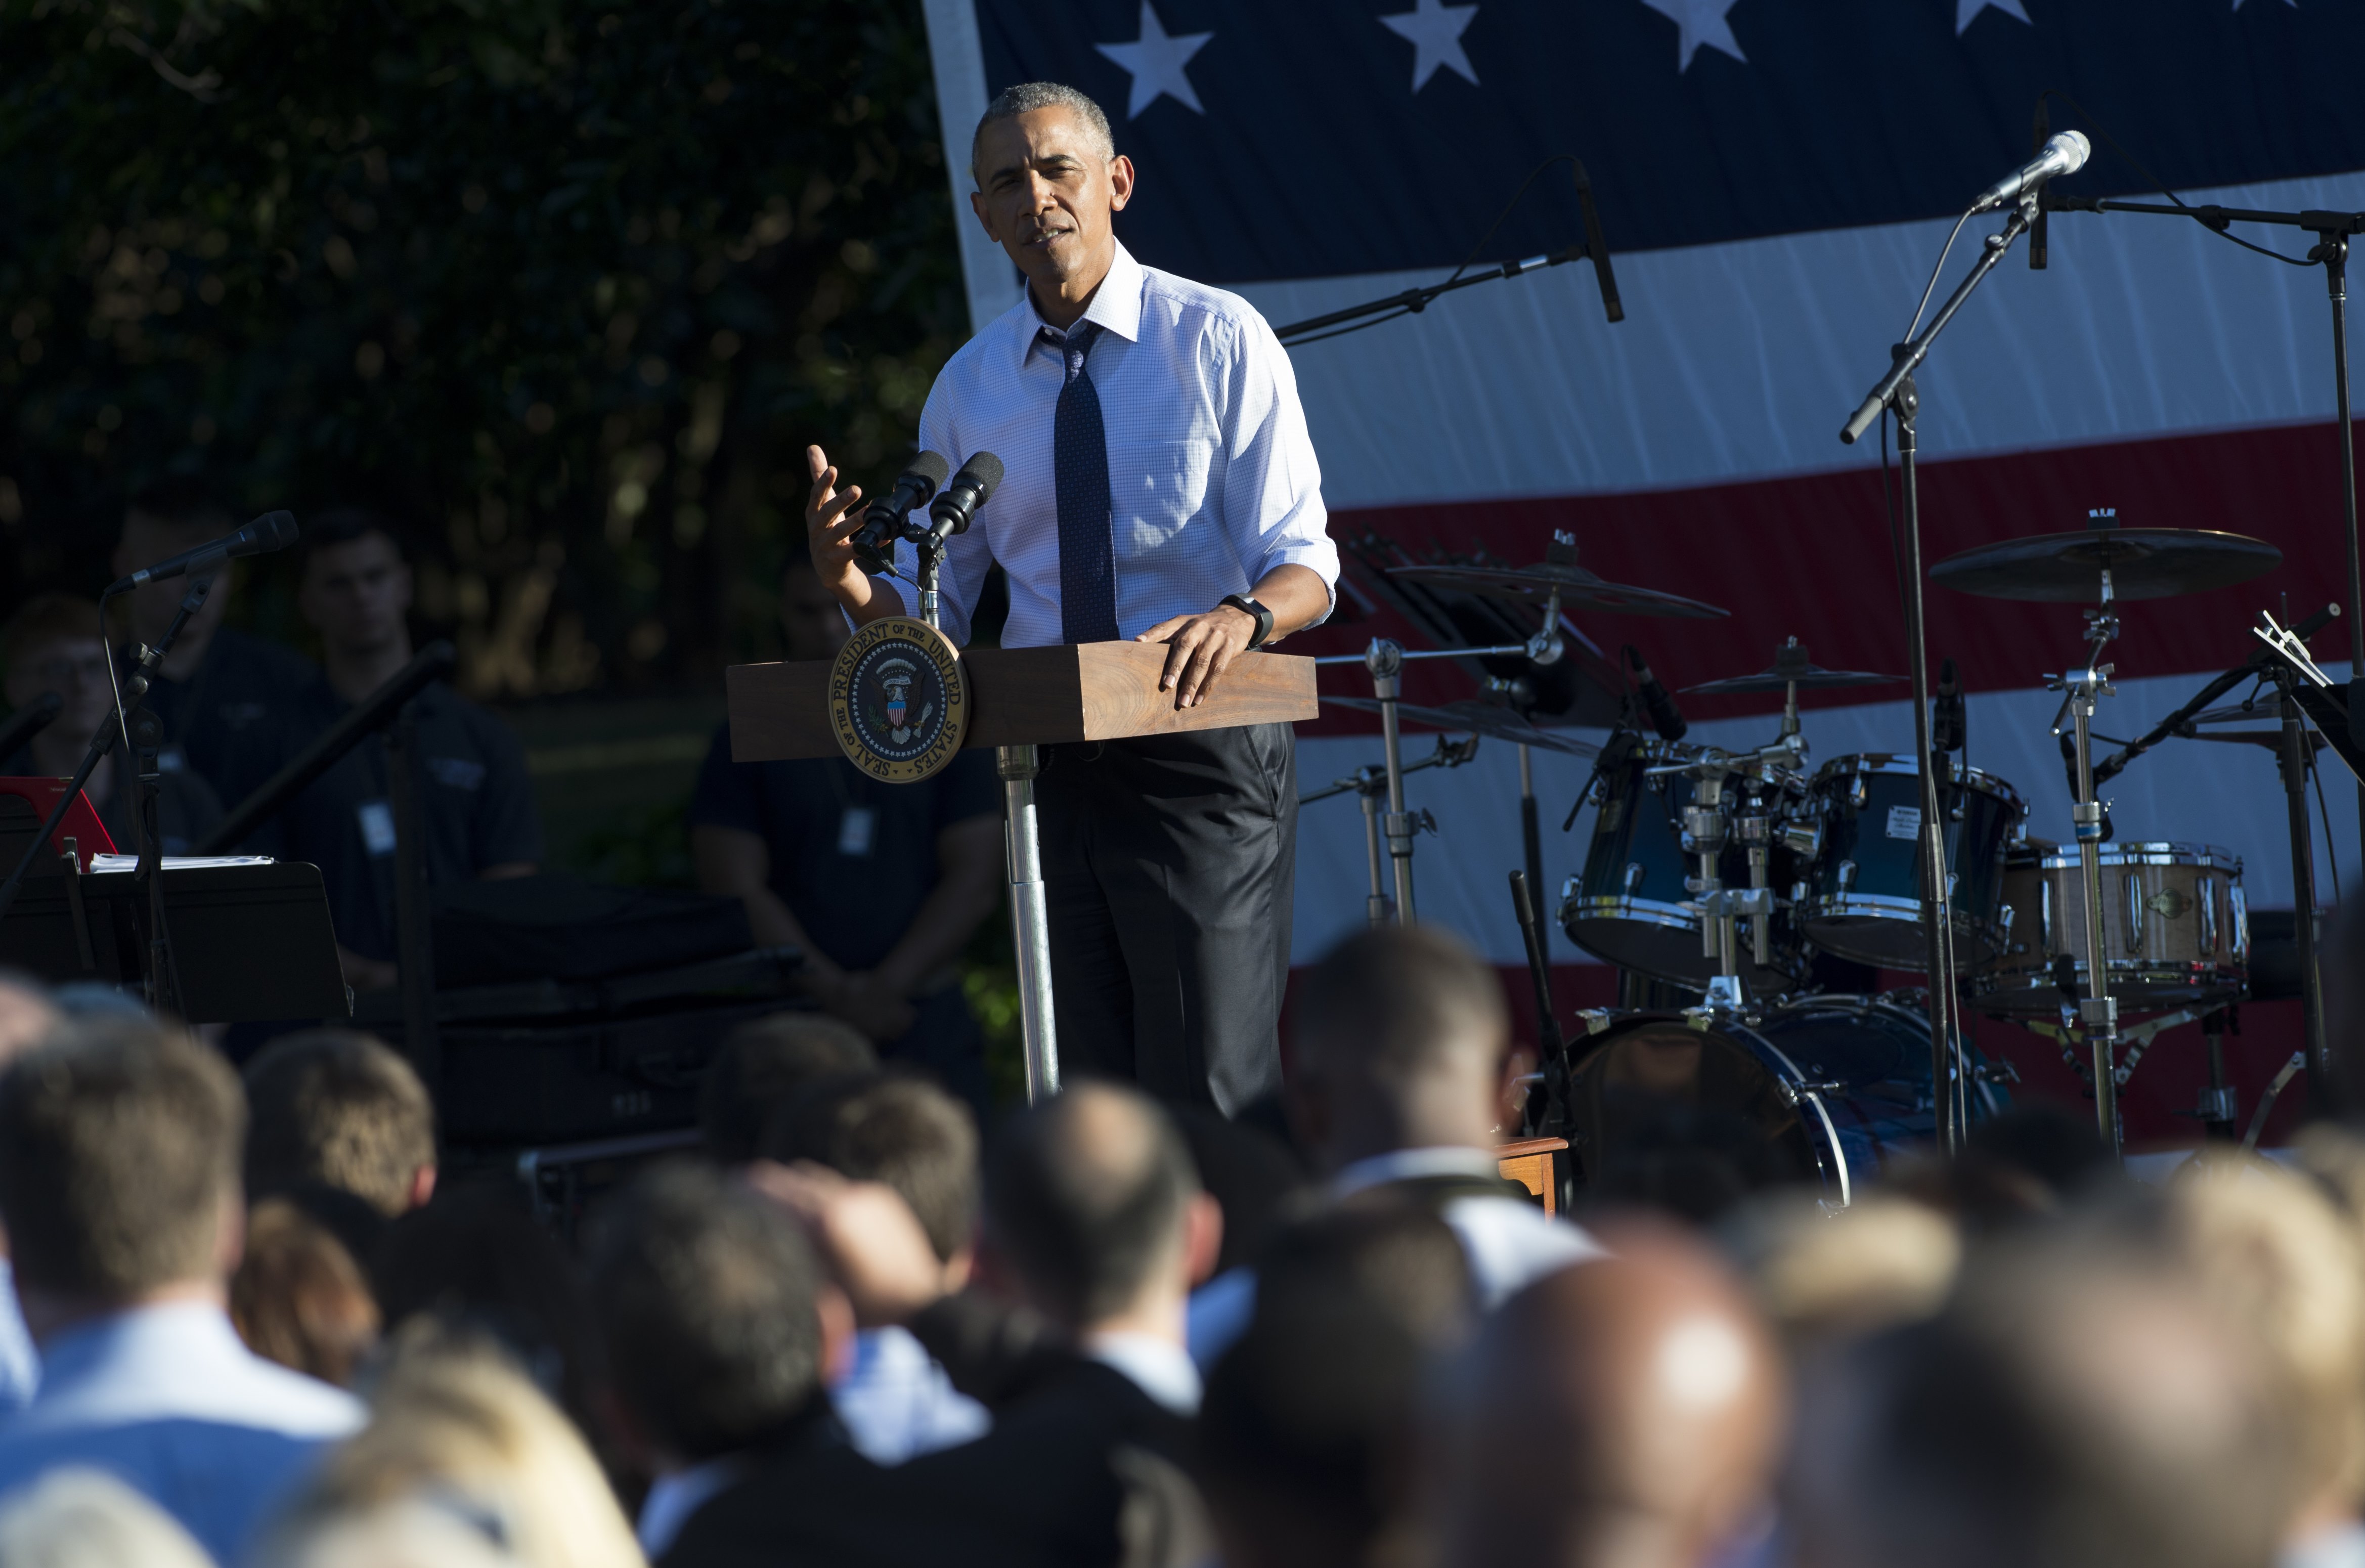 US President Barack Obama speaks during a picnic for members of Congress on the South Lawn of the White House in Washington, DC, June 14, 2016. / AFP PHOTO / SAUL LOEB